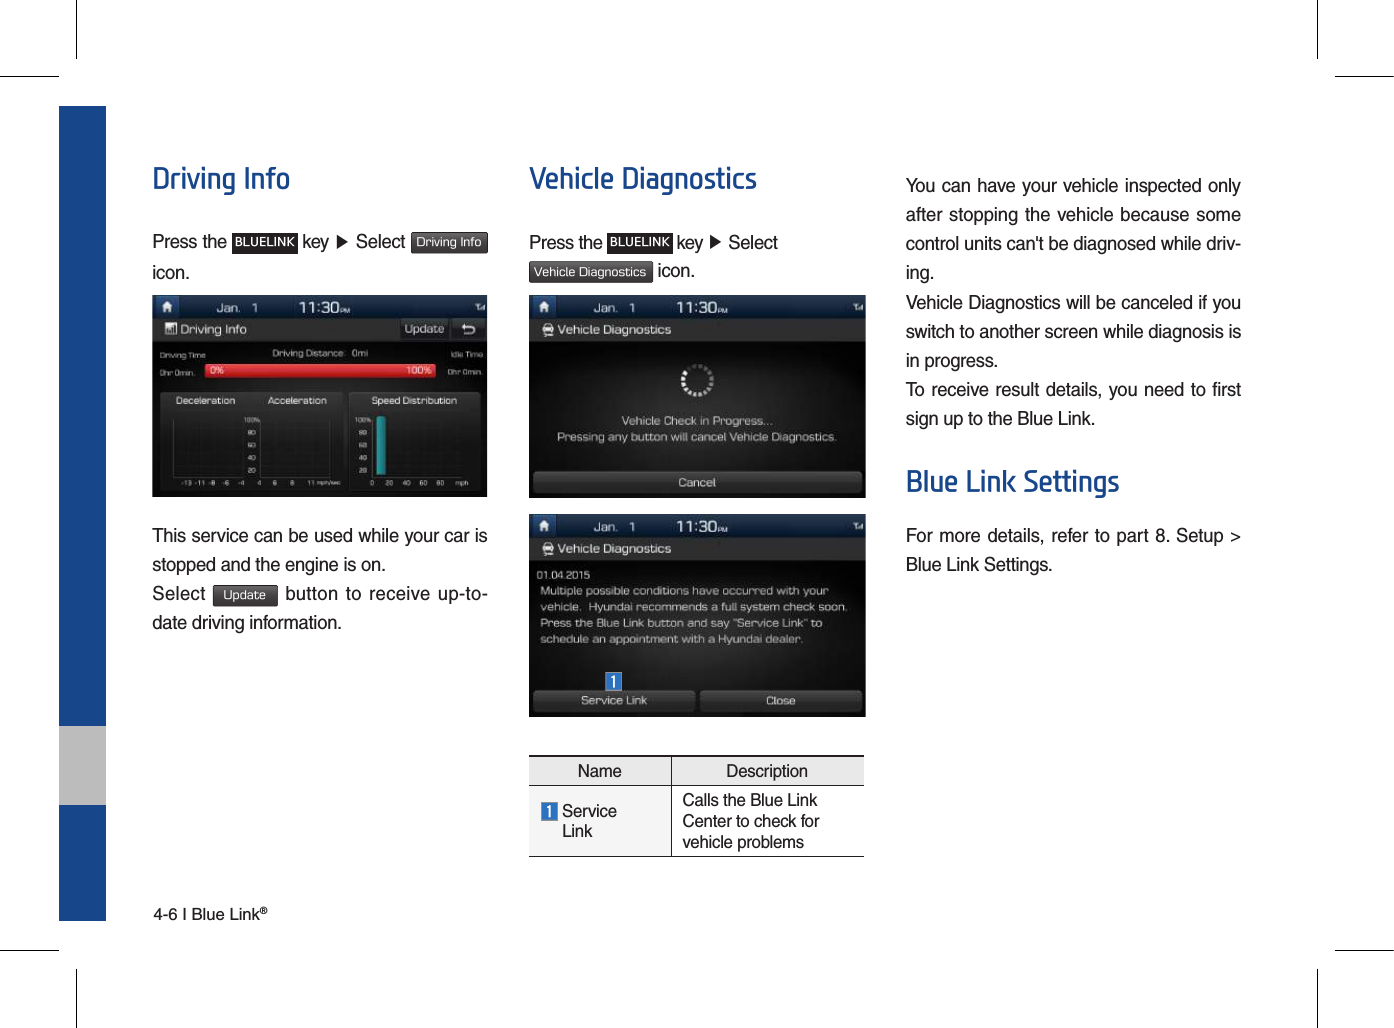 4-6 I Blue Link®Driving InfoPress the BLUELINK key ▶ Select Driving Info  icon.This service can be used while your car is stopped and the engine is on. Select Update button to  receive up-to-date driving information. Vehicle DiagnosticsPress the BLUELINK key ▶ Select Vehicle Diagnostics icon.Name Description  Service  LinkCalls the Blue Link Center to check for vehicle problemsYou can have your vehicle inspected only after stopping the vehicle because some control units can&apos;t be diagnosed while driv-ing.Vehicle Diagnostics will be canceled if you switch to another screen while diagnosis is in progress.To receive result details, you need to first sign up to the Blue Link.Blue Link SettingsFor more details, refer to part 8. Setup &gt; Blue Link Settings.